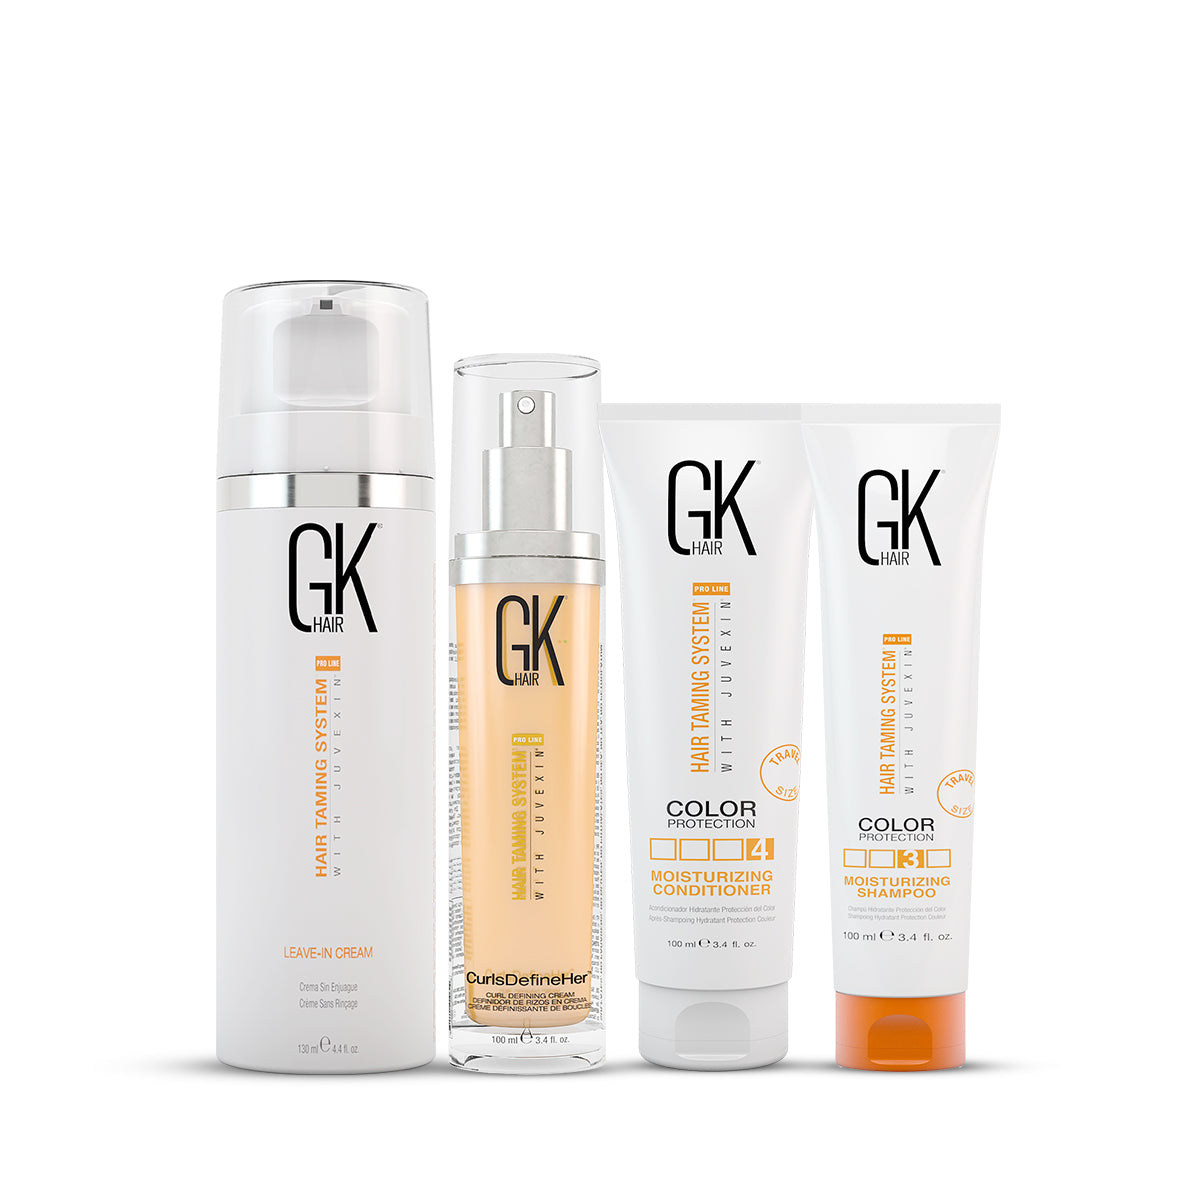 GK Hair Moisturizing Shampoo and Conditioner 100 Ml with CurlsDefineHer Spray and Leave In Conditioner Cream